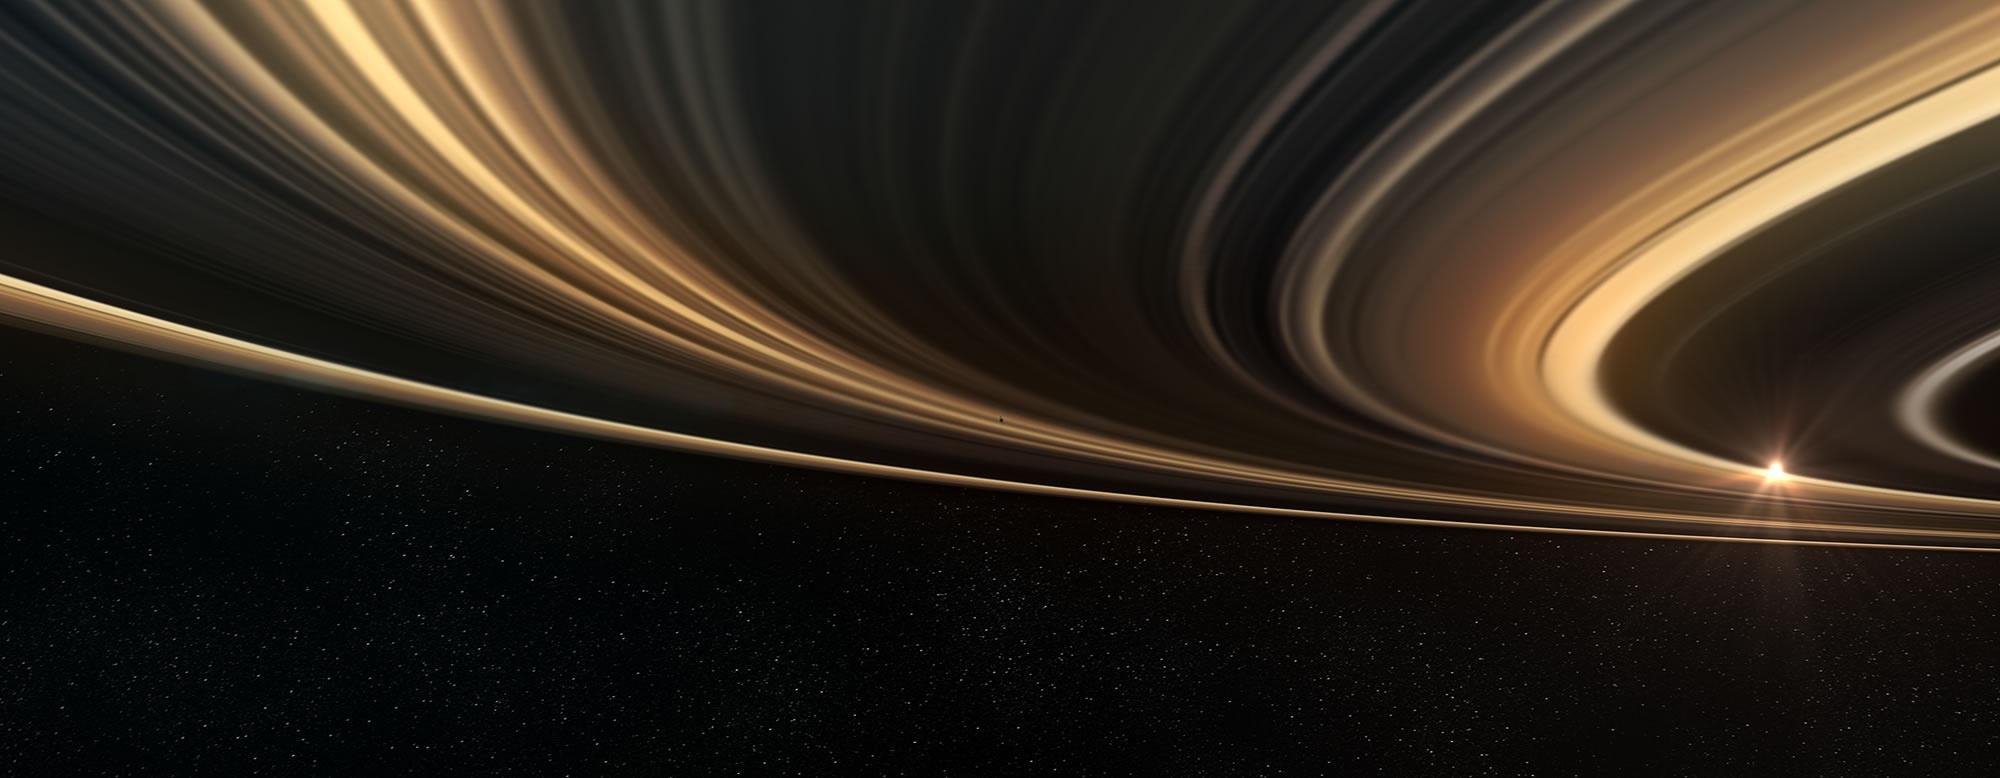 close-up of Saturn's rings